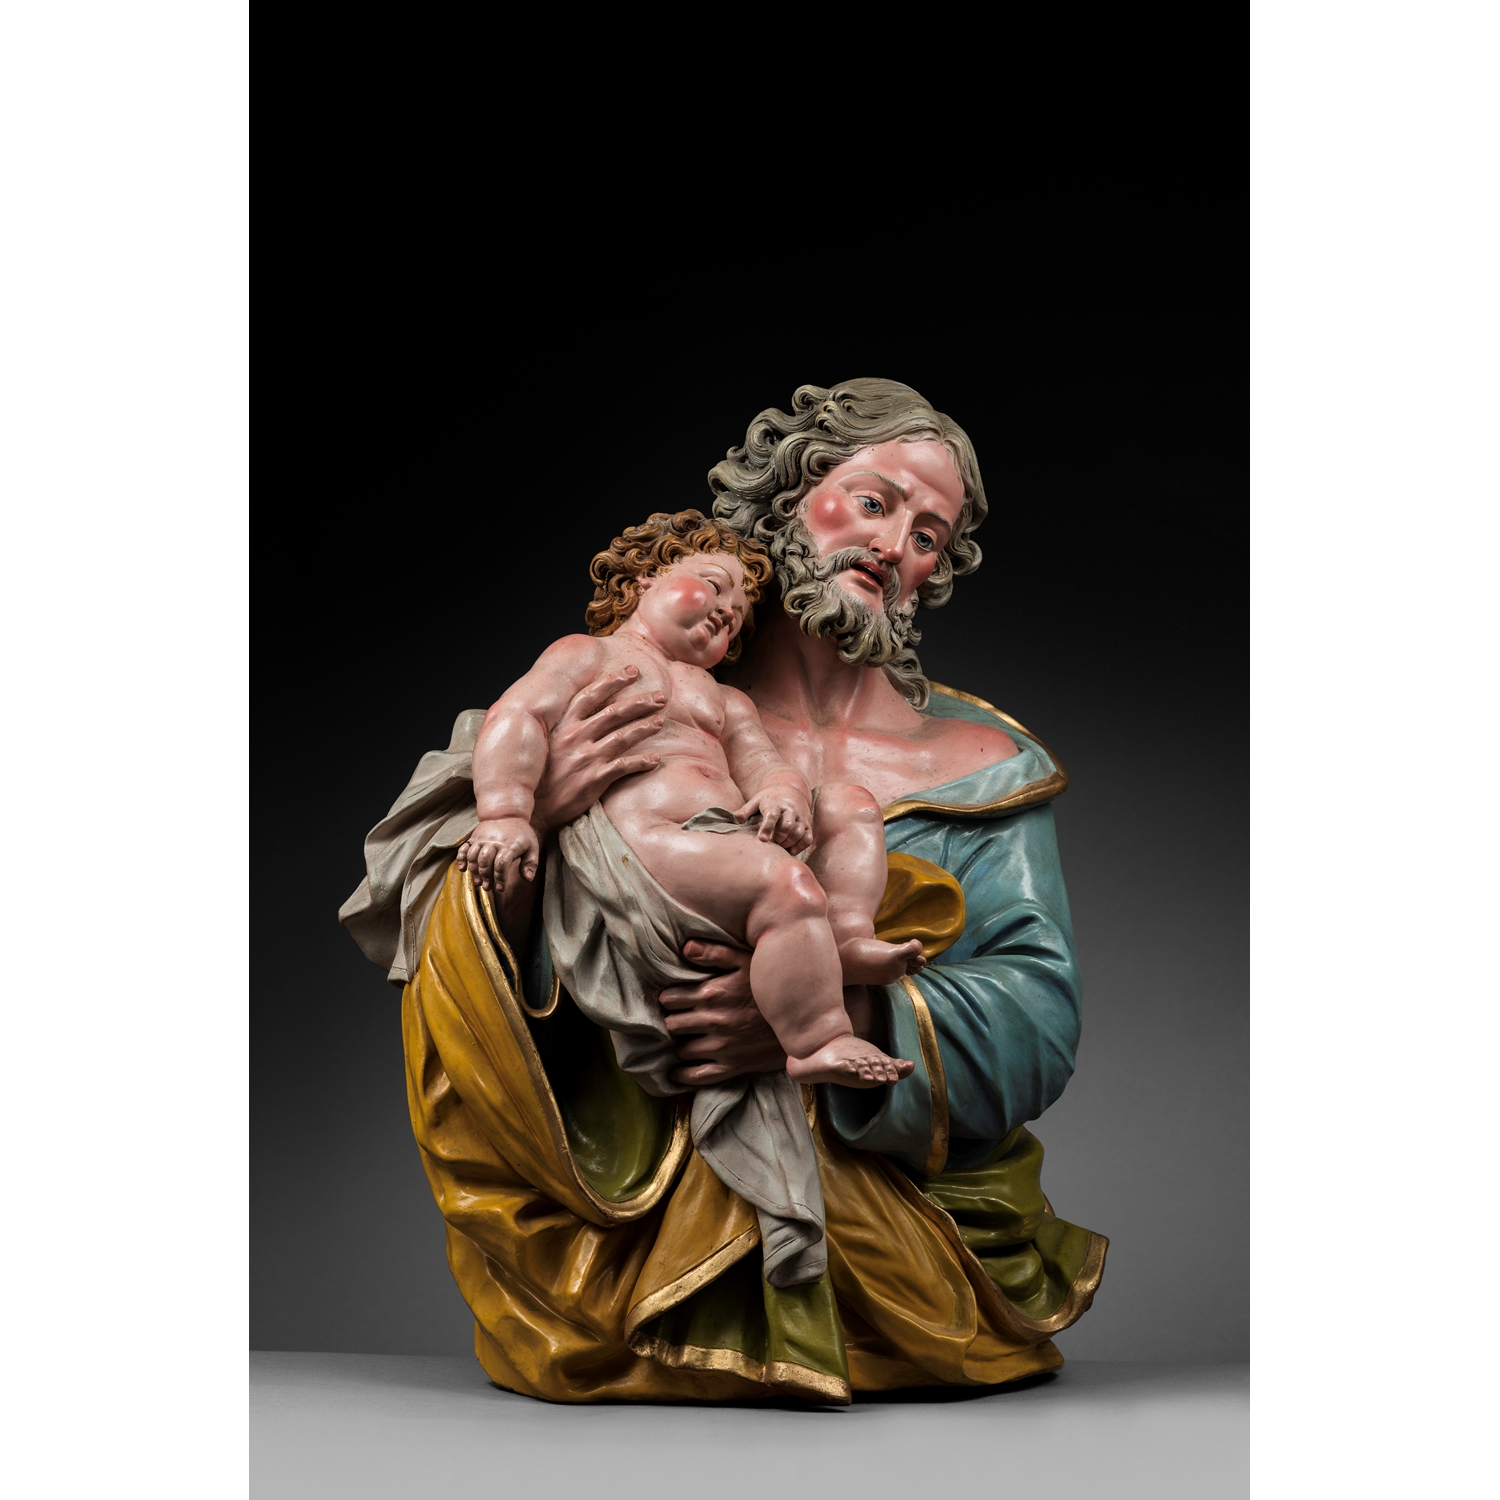 ATTRIBUTED TO GIUSEPPE PICANO  ( 1716 - 1810 ) SAINT JOSEPH AND THE CHRIST CHILD - SOLD